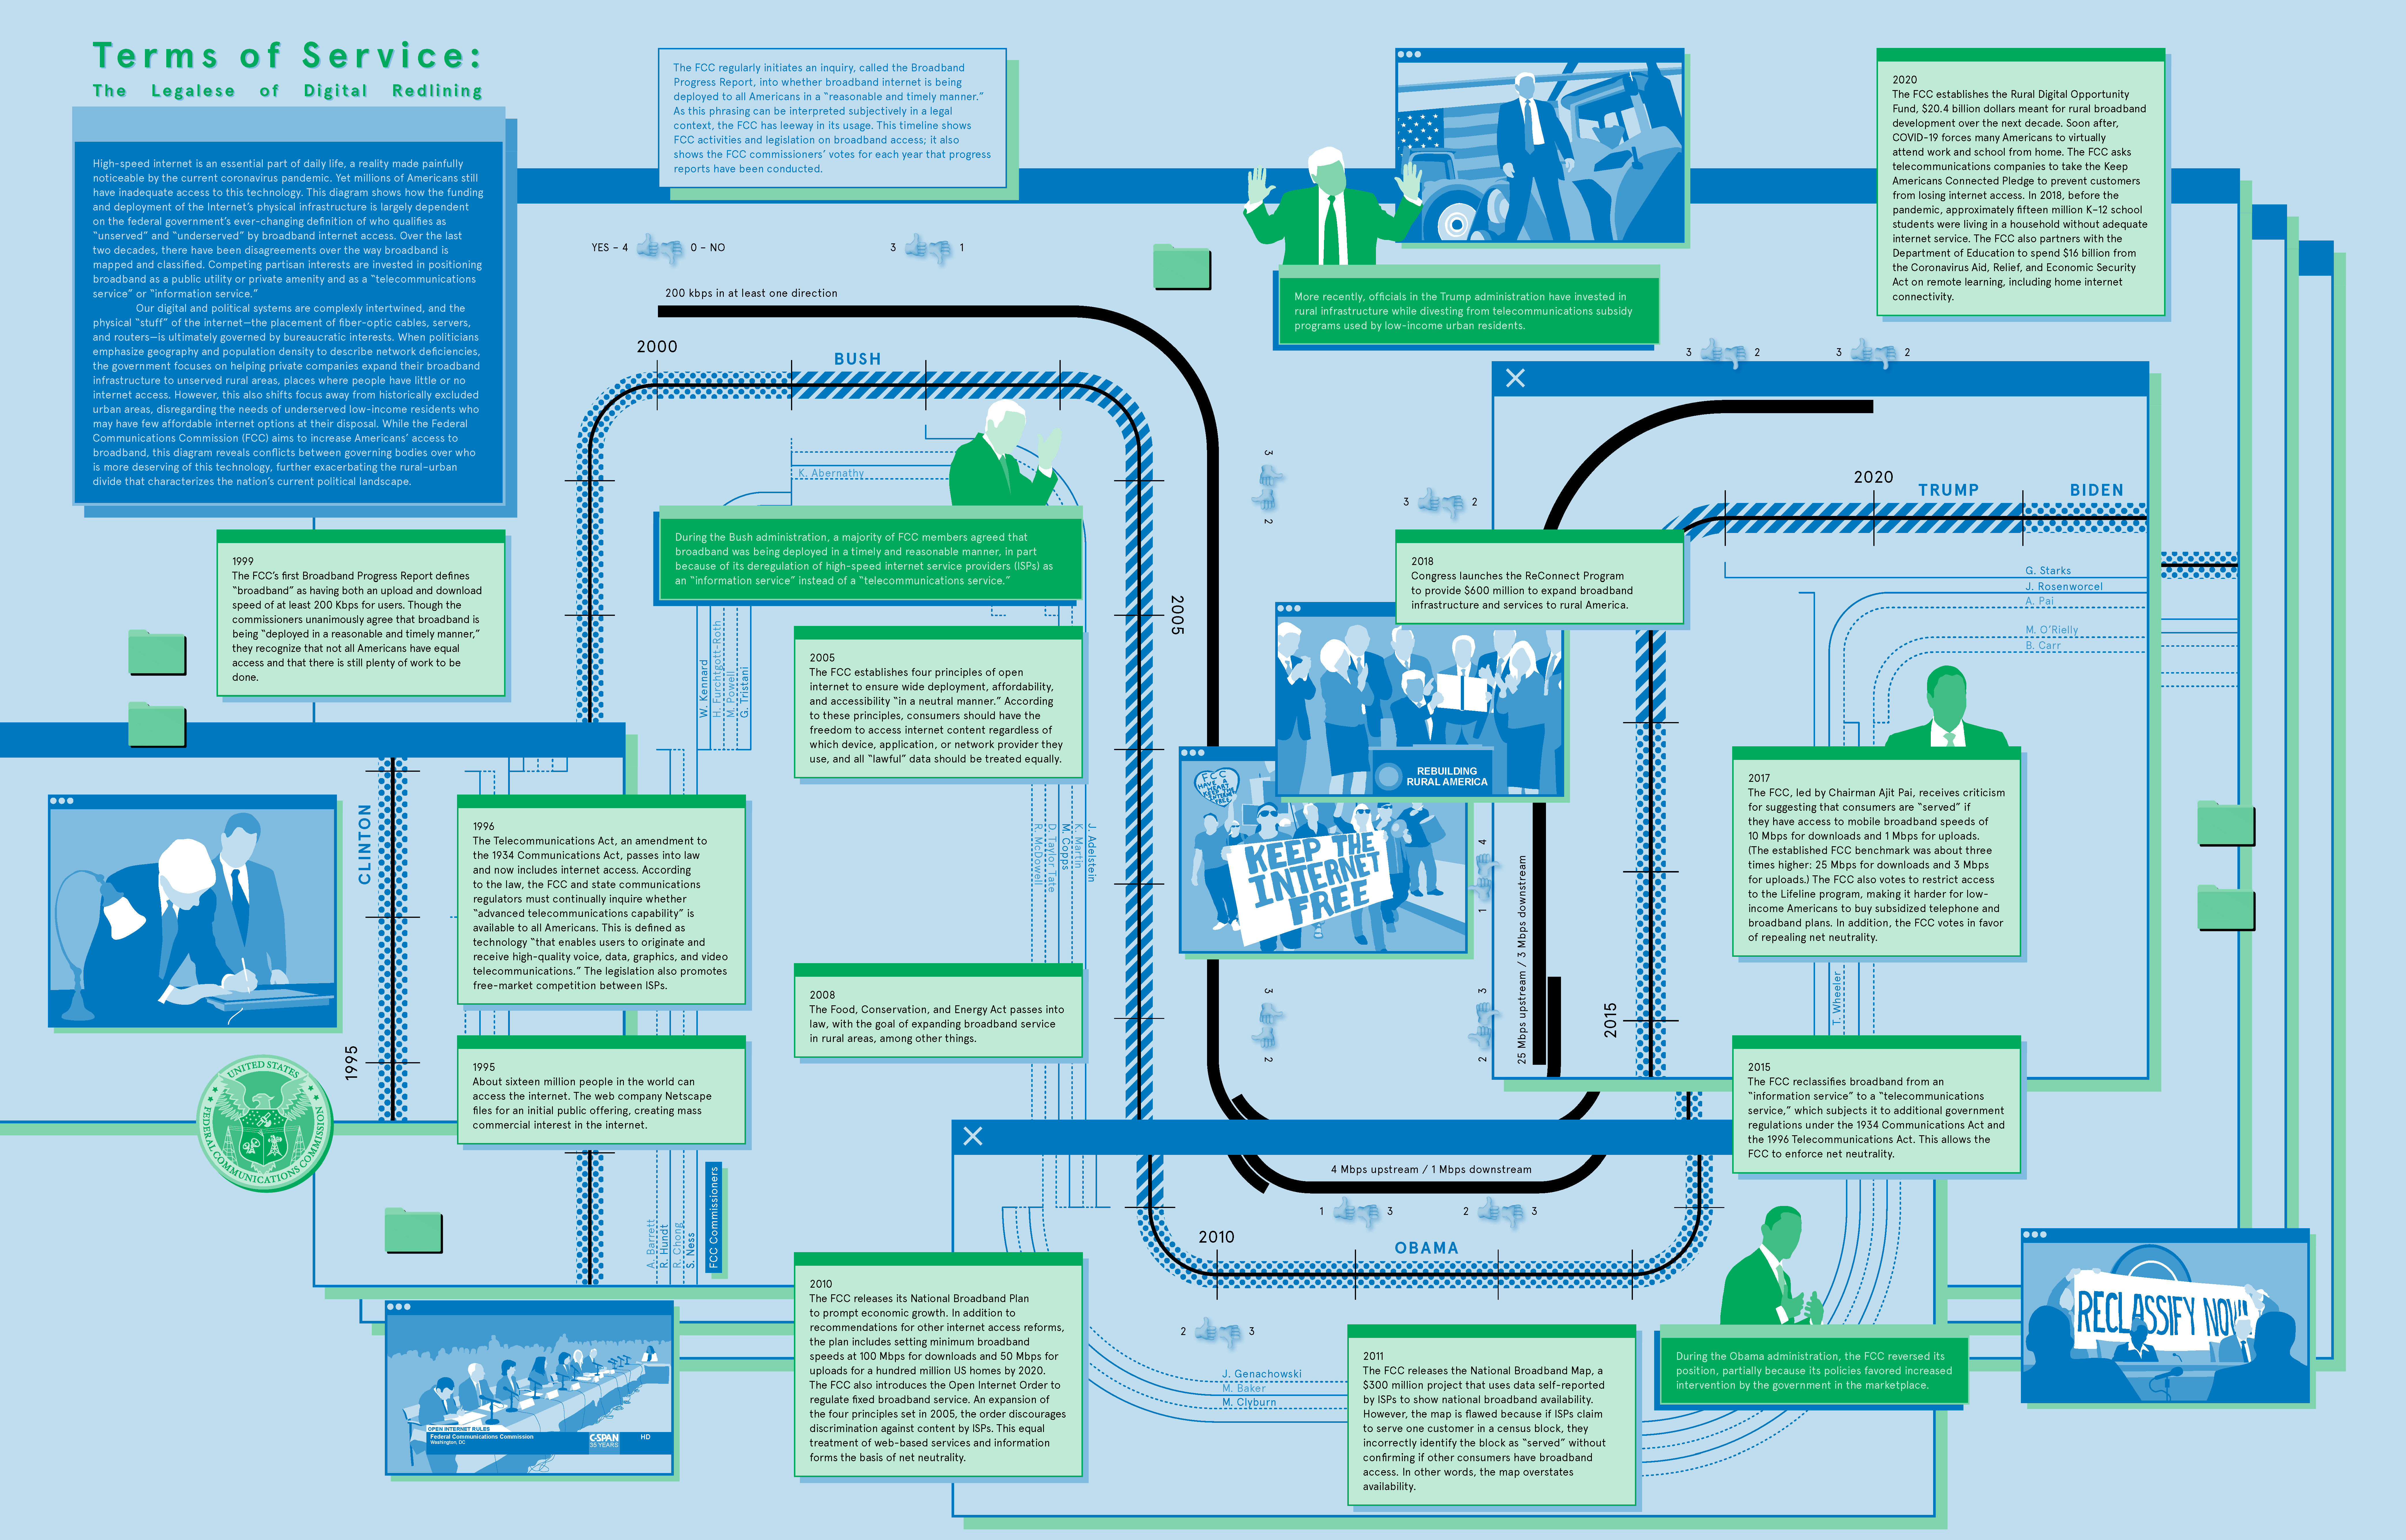 large graphic laying explaining timeline of funding and deployment of internet broadband infrastructure across the United States.